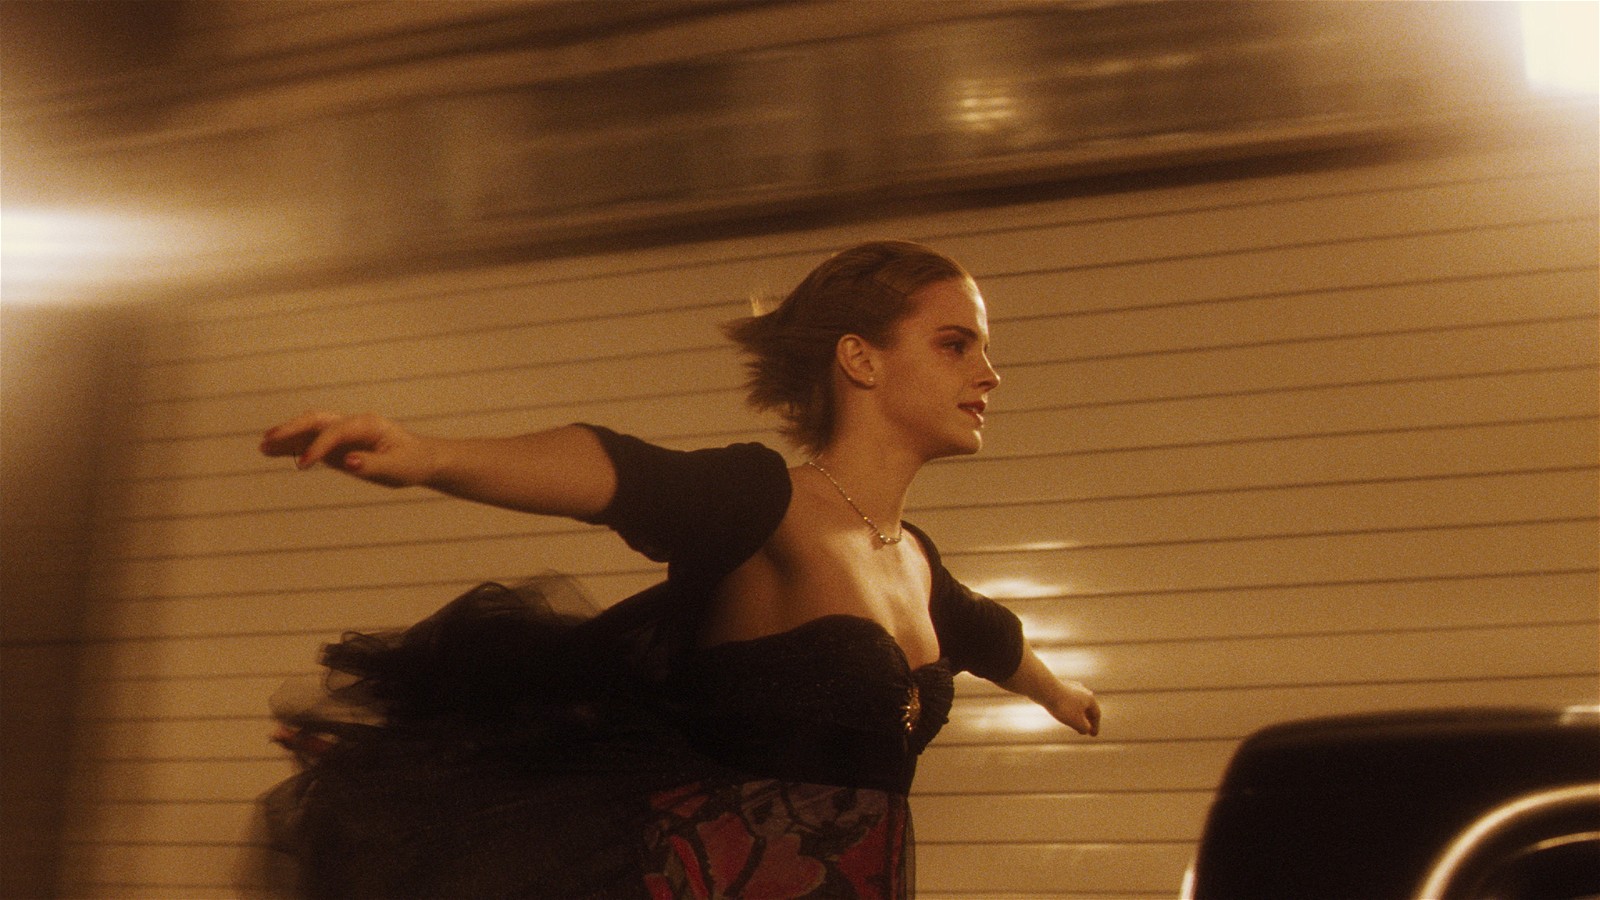 Emma Watson in a still from The Perks of Being a Wallflower